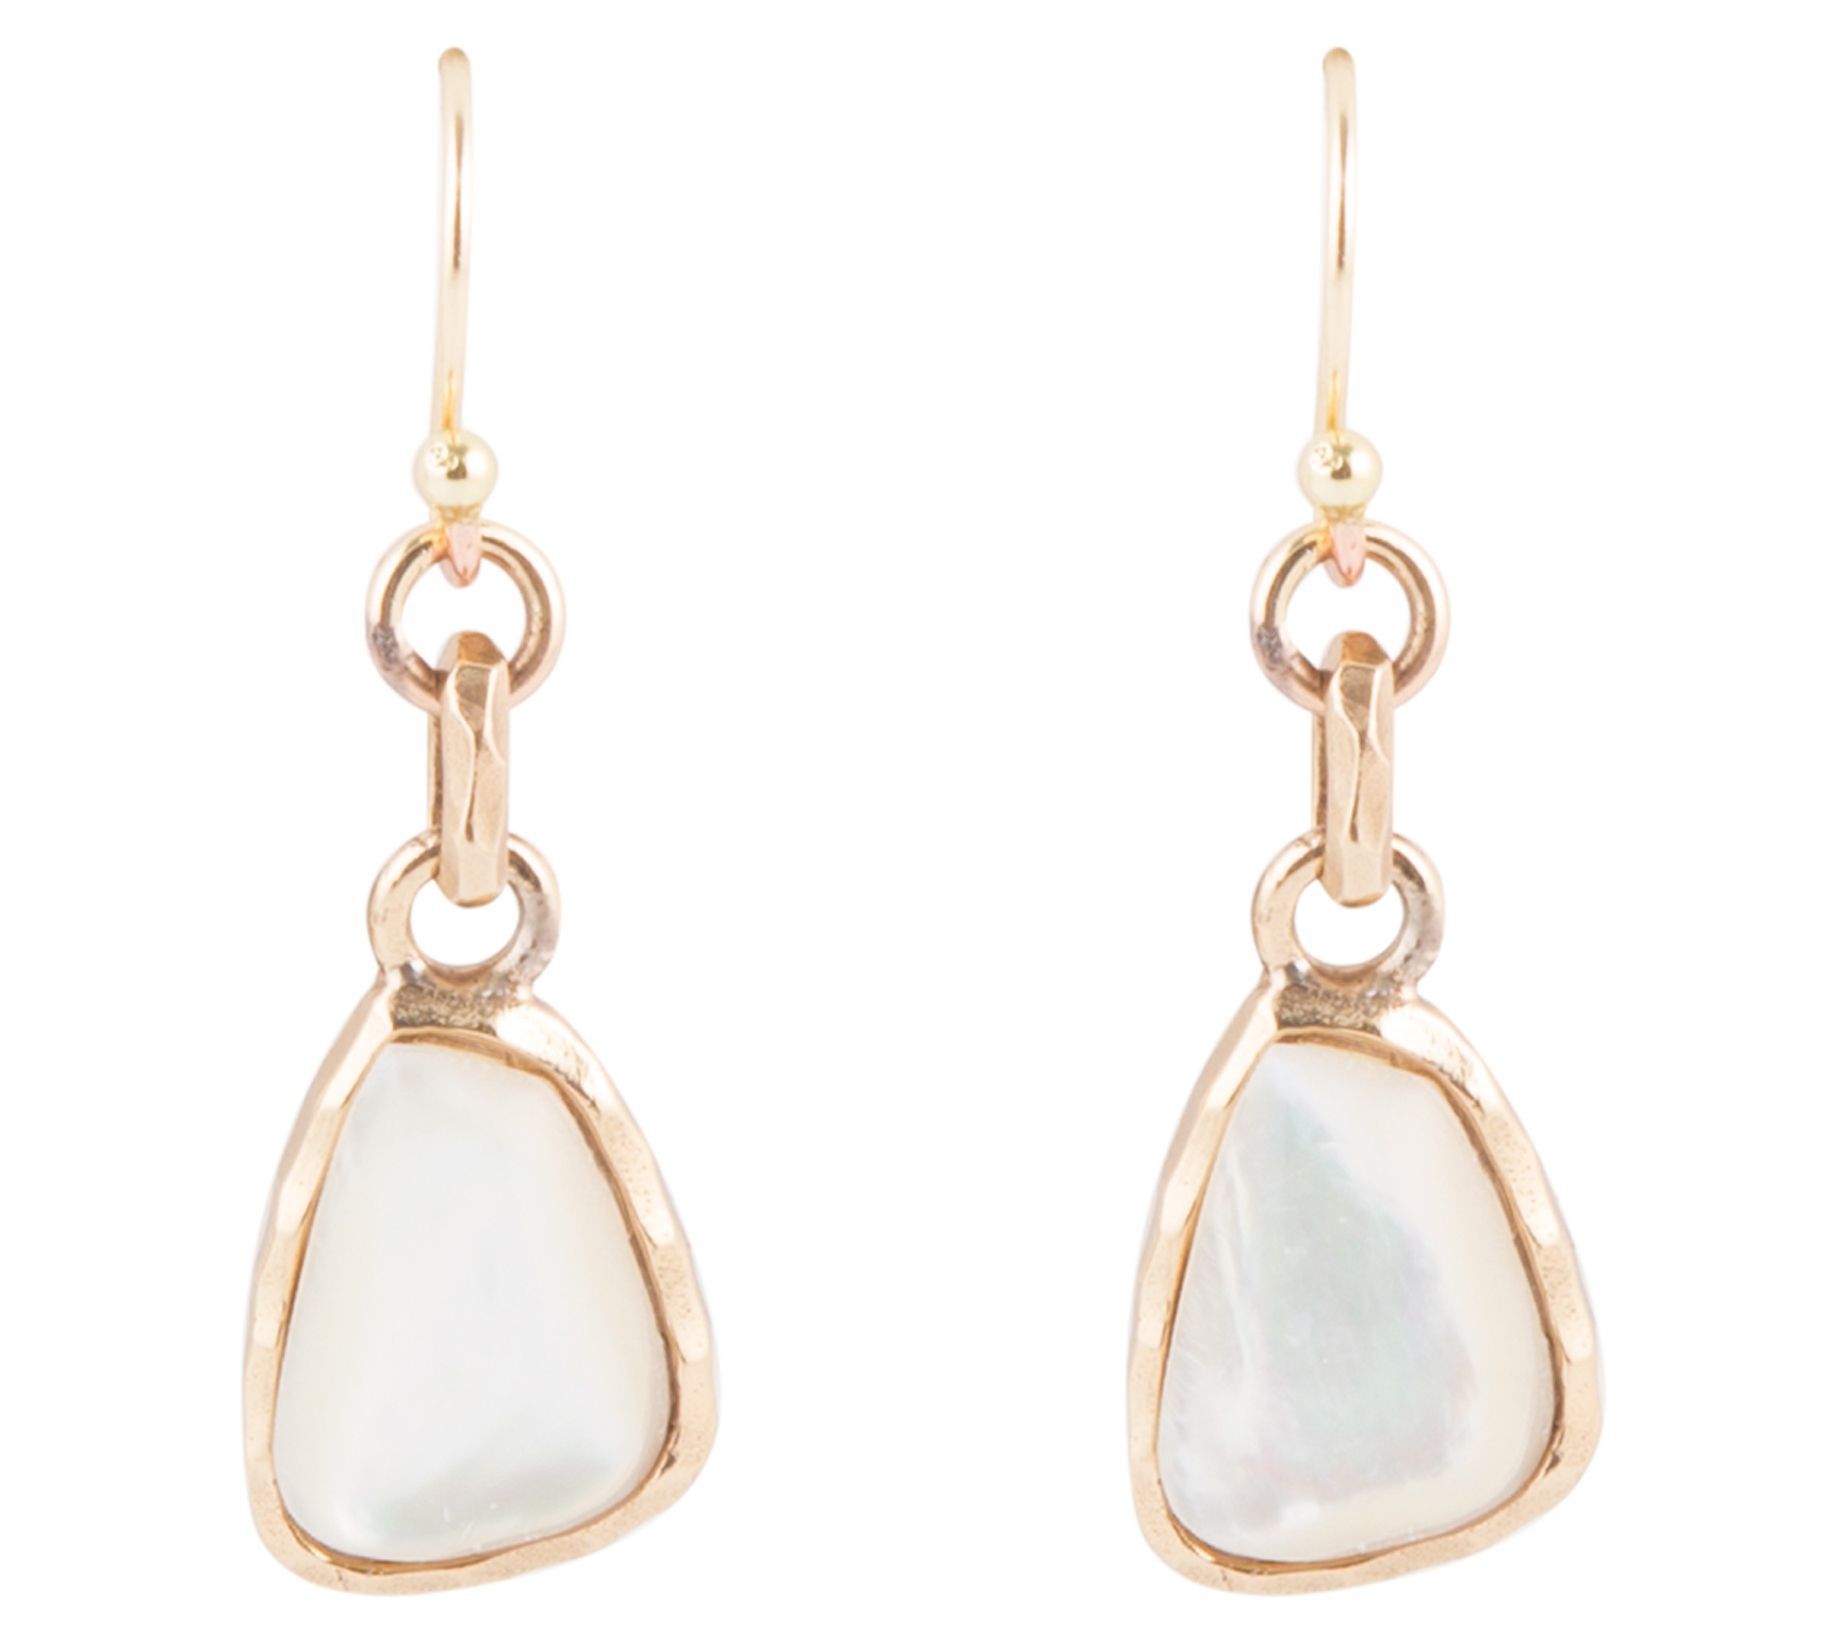 Barse Artisan Crafted Genuine Mother-of-Pearl Earrings - QVC.com